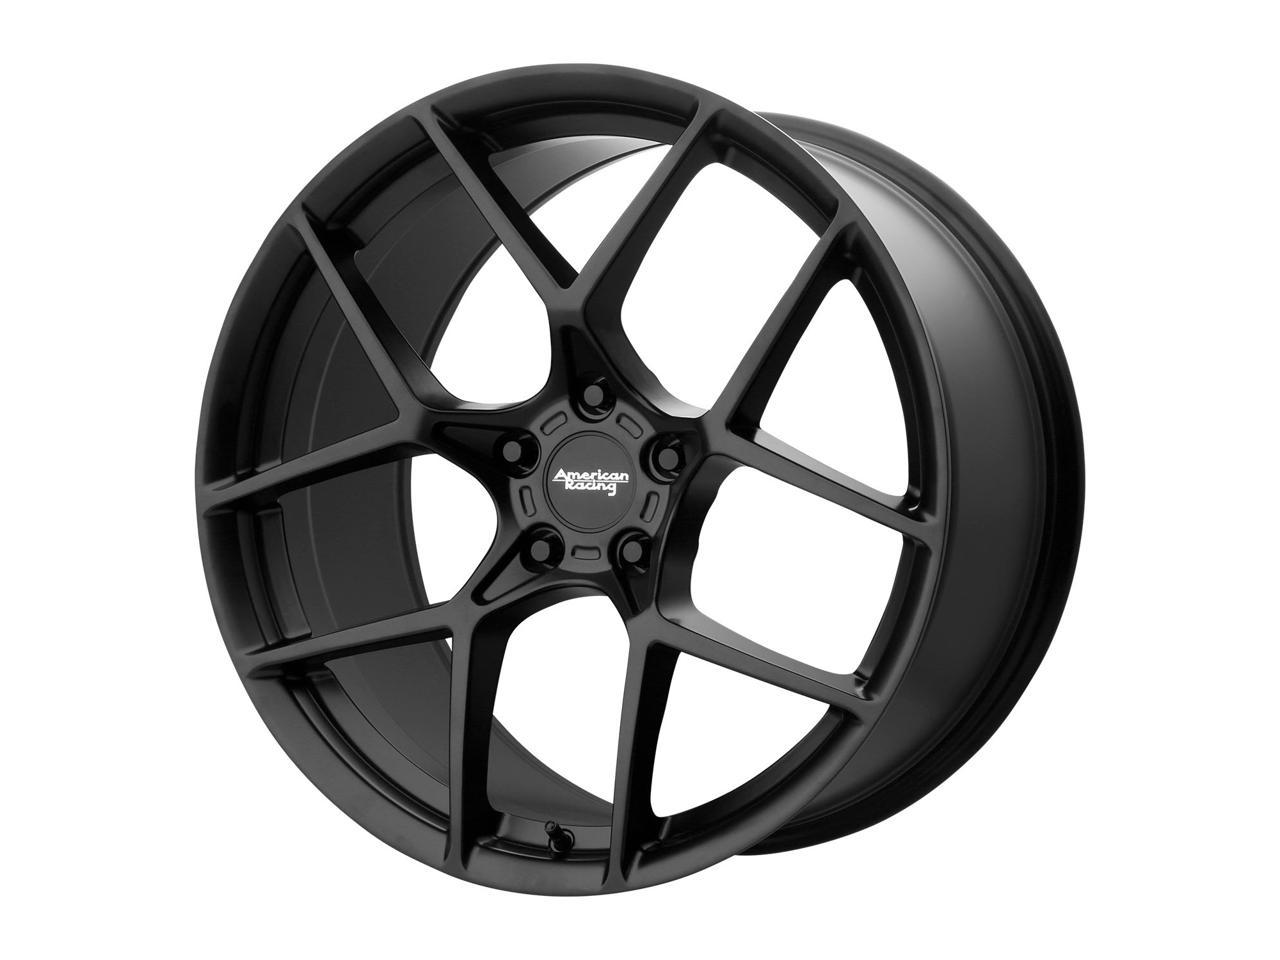 20 x 12. inches /5 x 110 mm, -44 mm Offset hexavalent compounds XD Series by KMC Wheels XD825 BUCK 25 BLACK Wheel Chromium 